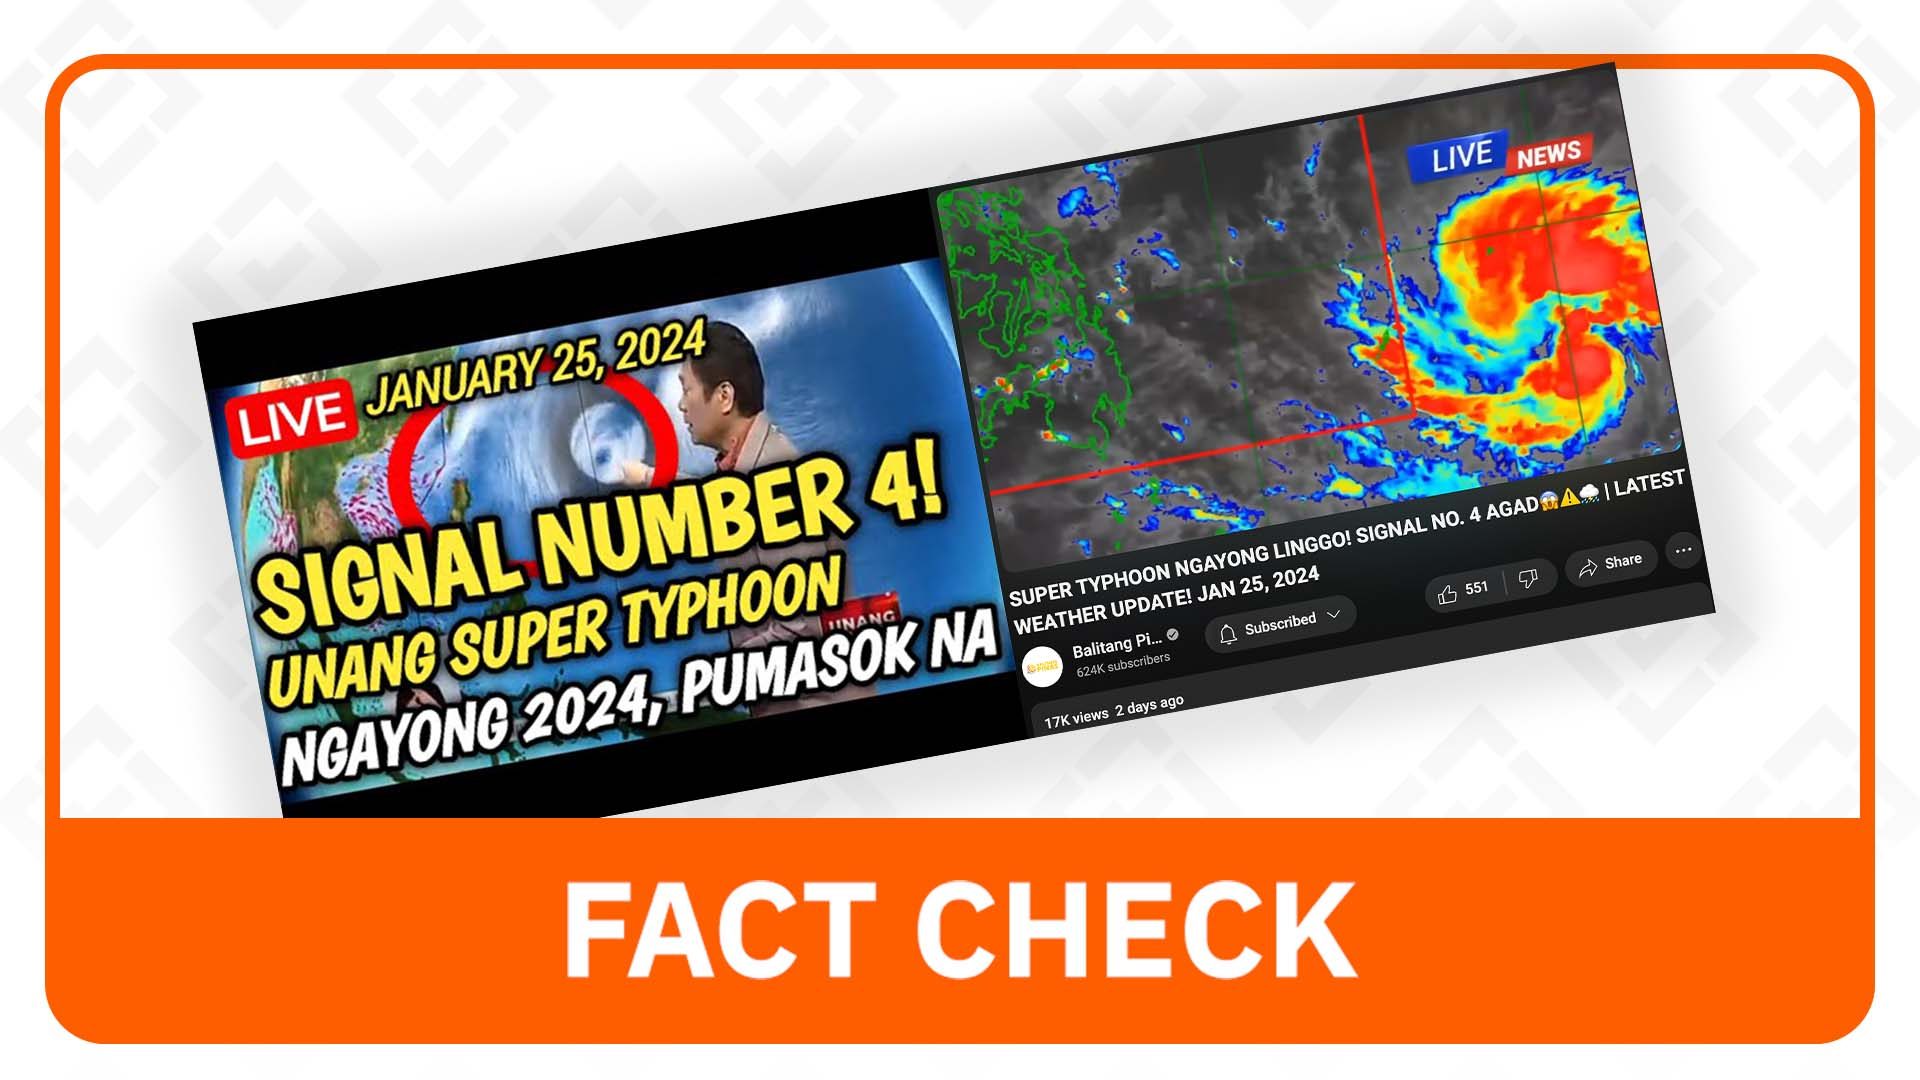 FACT CHECK: No super typhoon expected in PH up until January 28